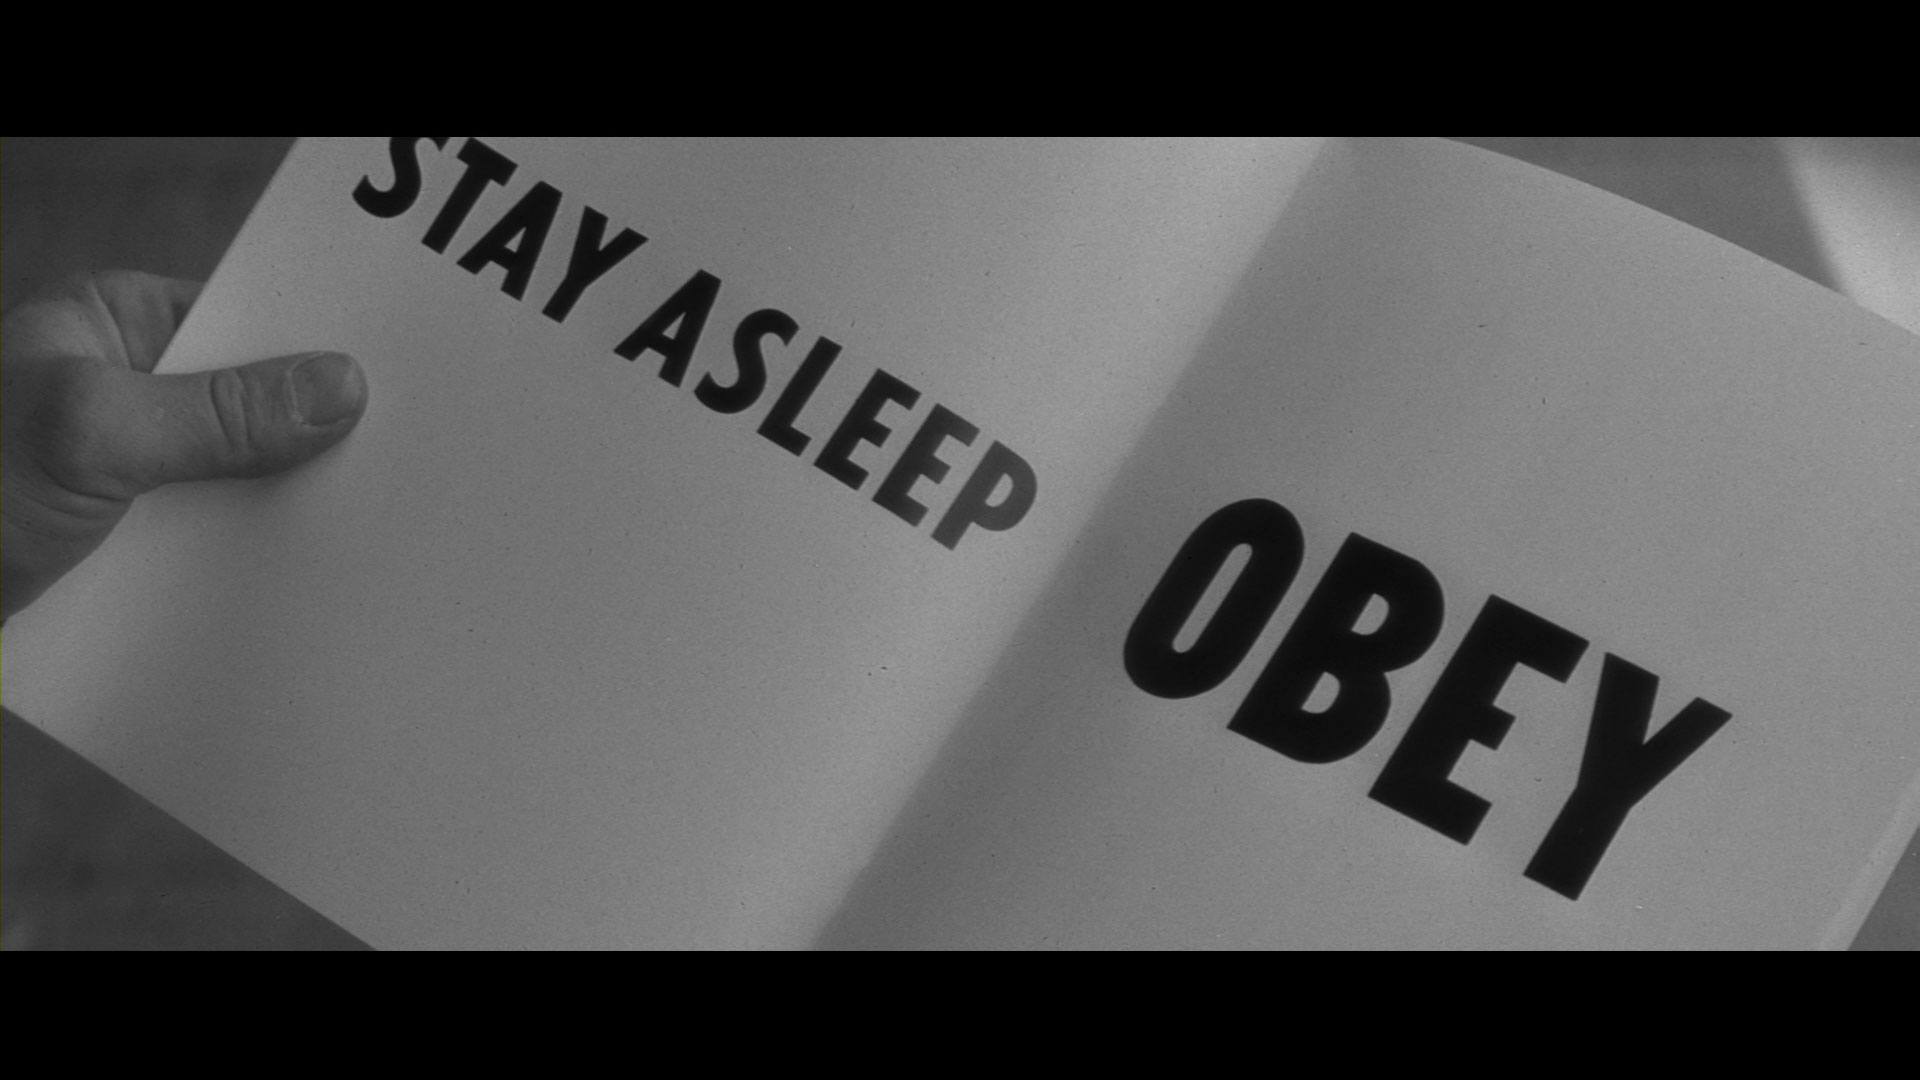 They lives или they live. They Live 1988. Чужие среди нас Obey. Чужие среди нас / they Live.